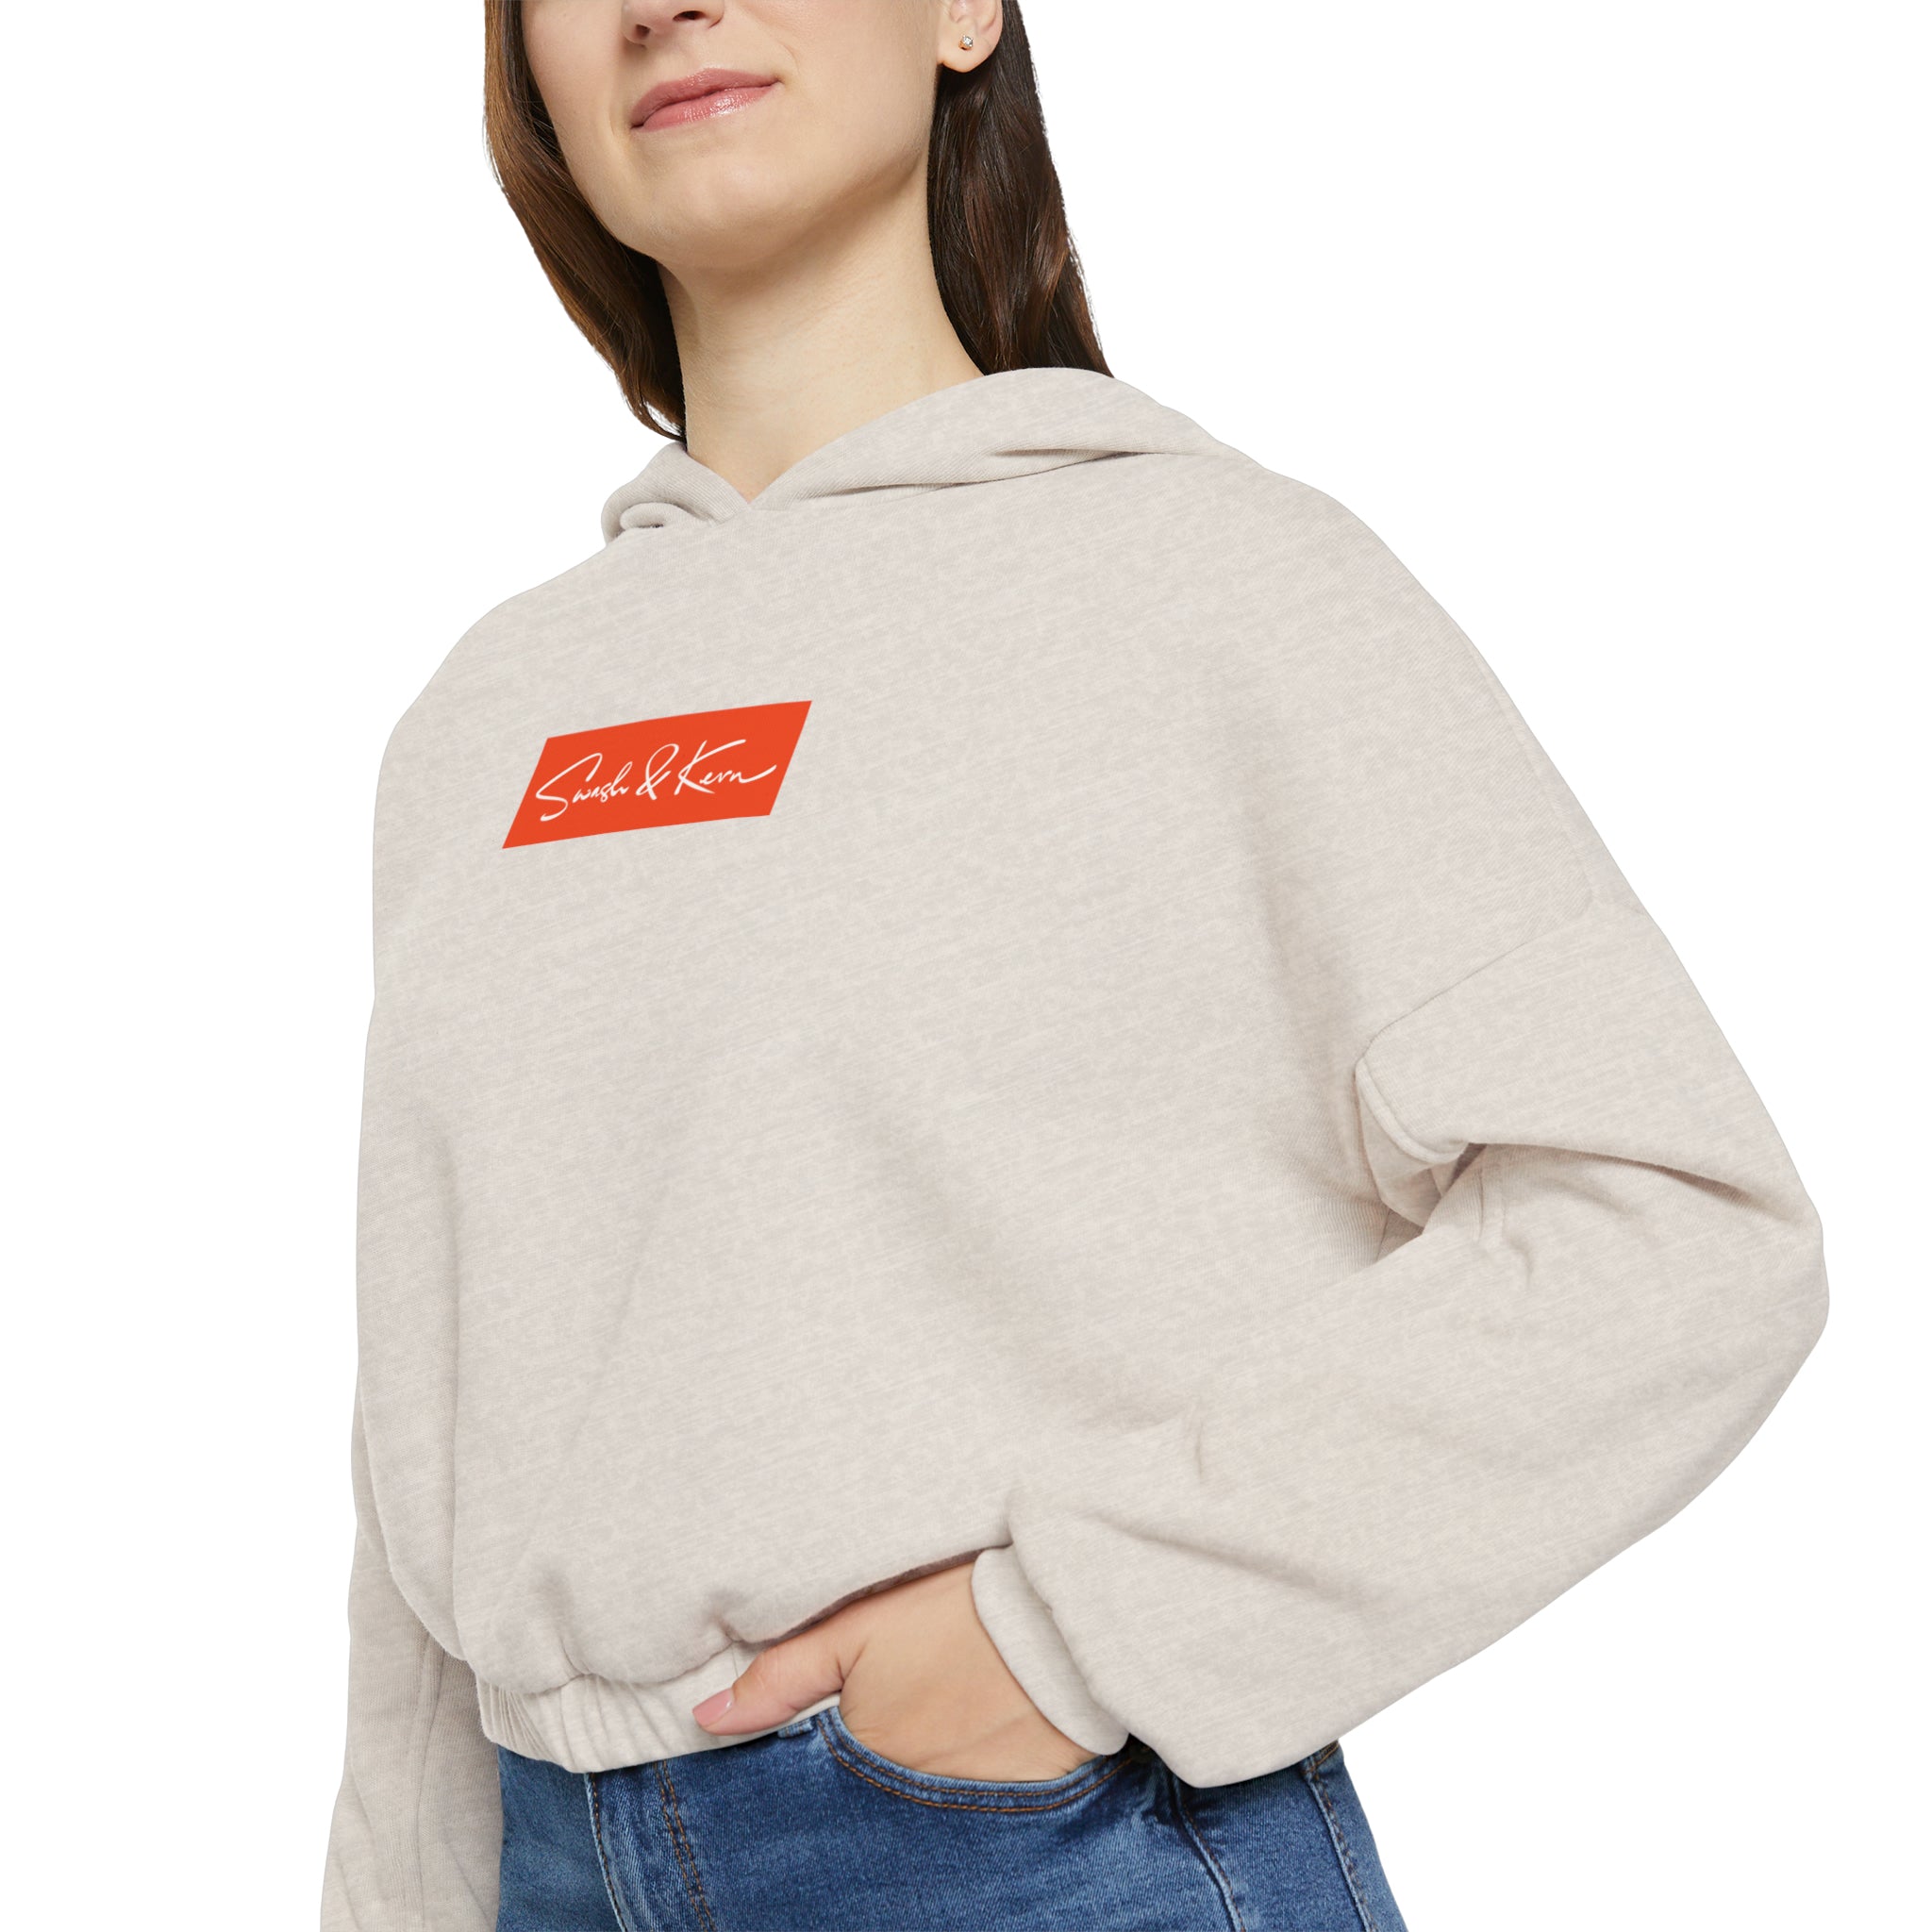 For The Love Of Letters Superscript Cinched Hoodie